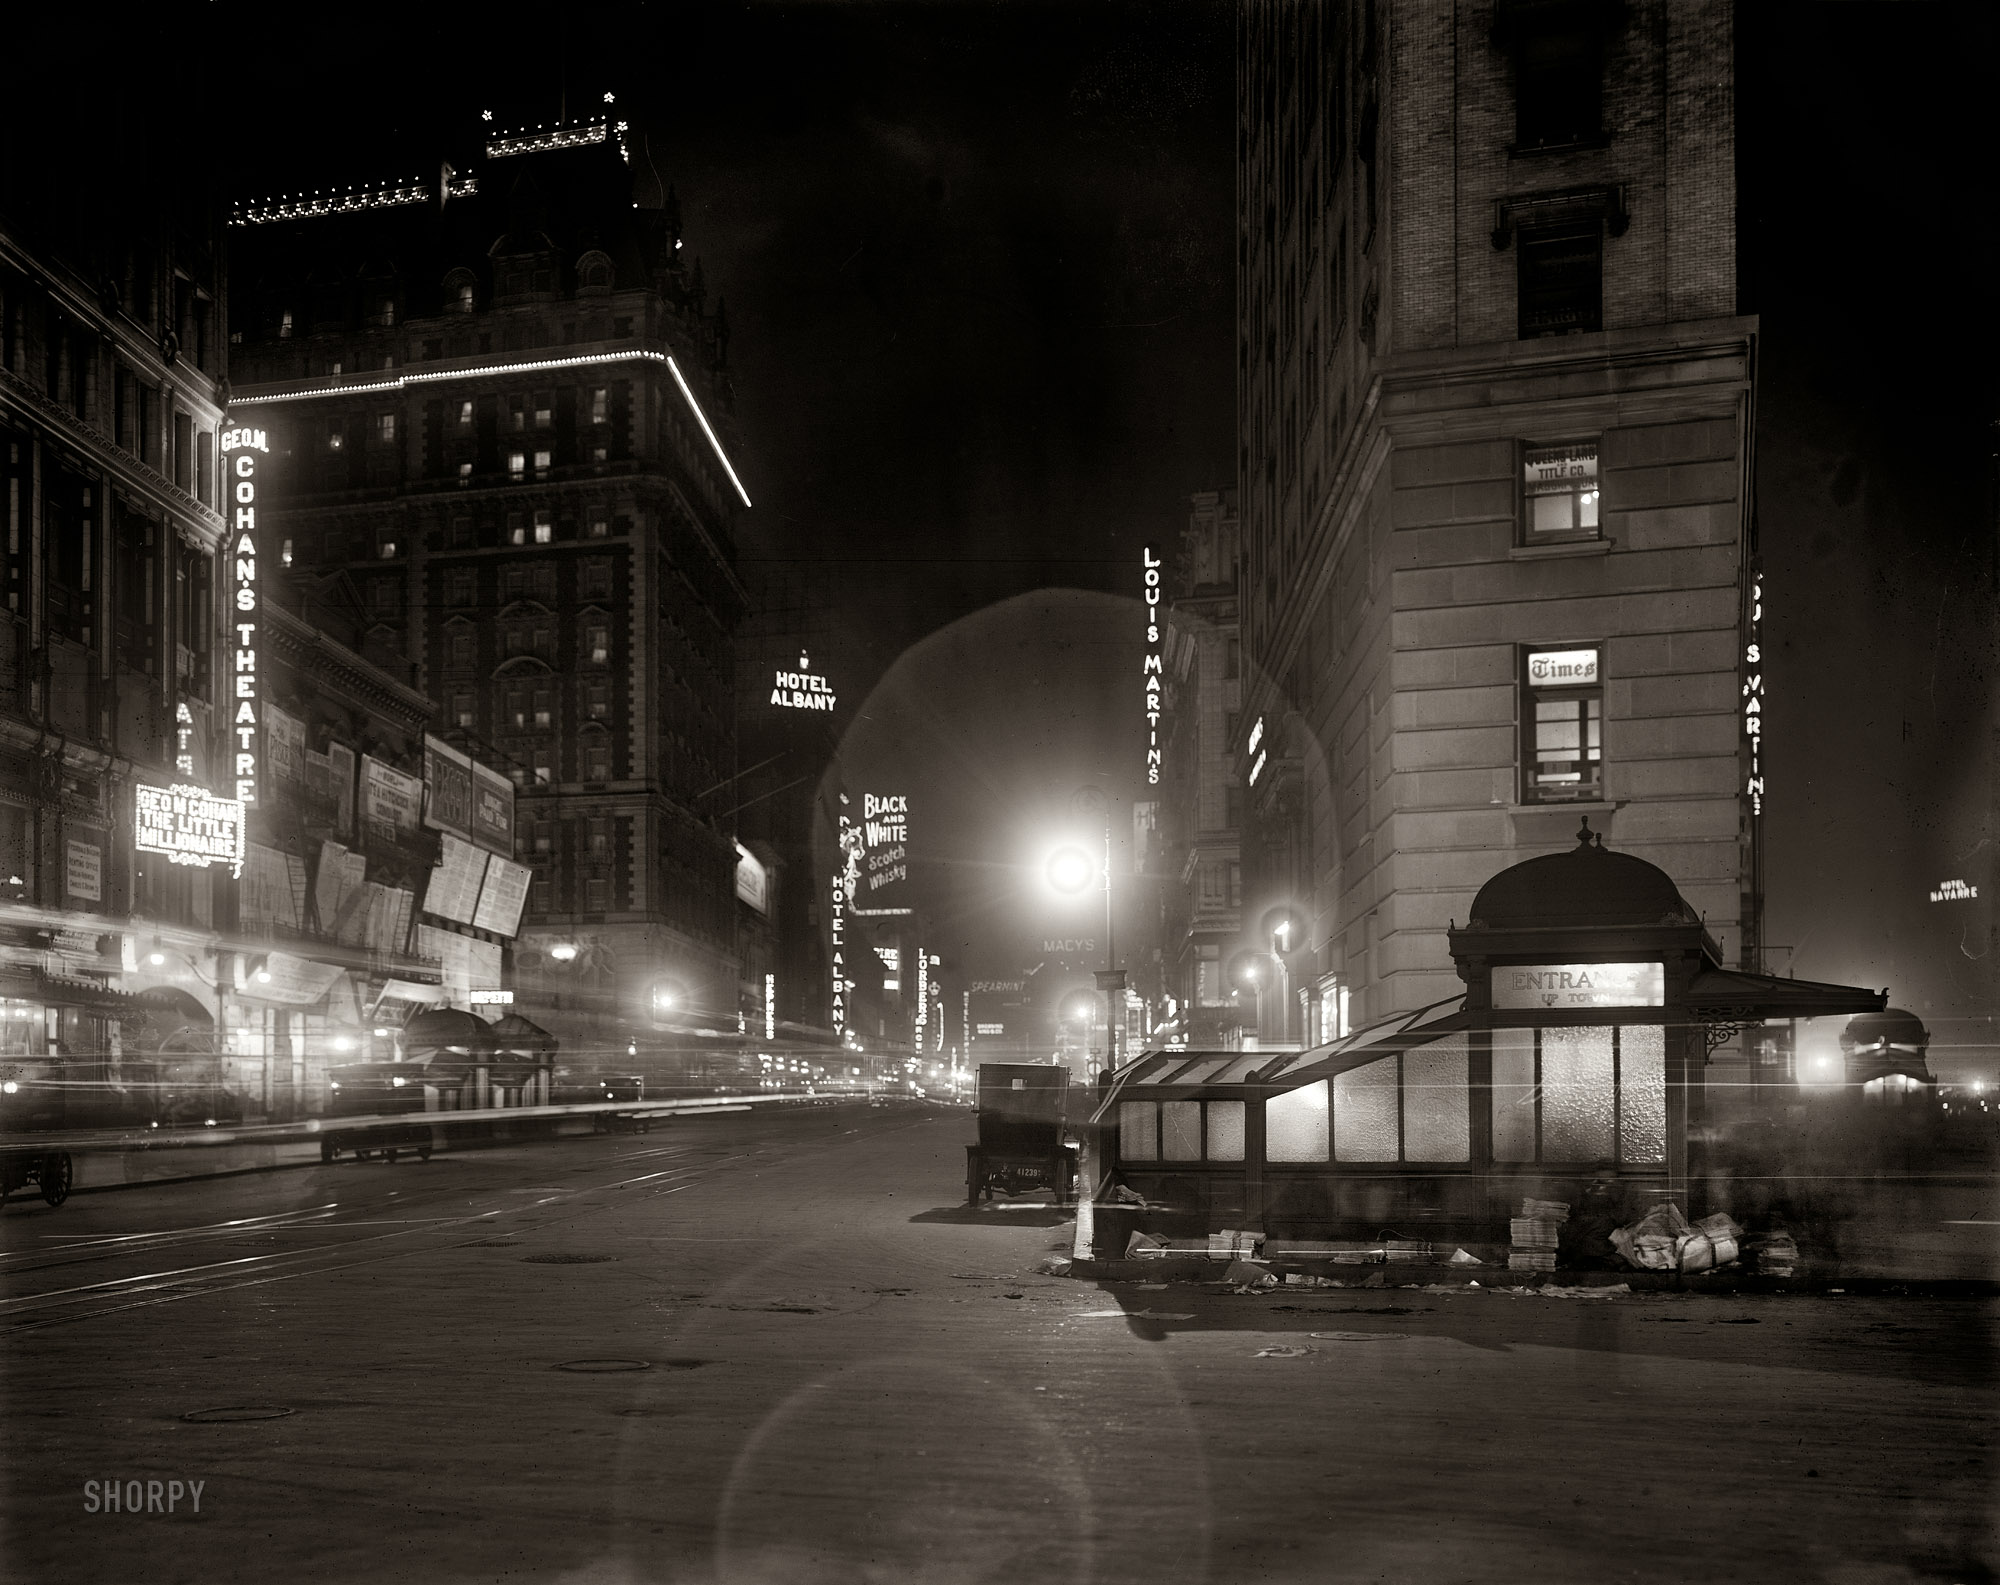 New York circa 1911. "Broadway at night from Times Square." With a phantom or two loitering at the subway entrance. Companion to the night view of Times Square posted here on Monday. 8x10 inch glass negative. View full size.